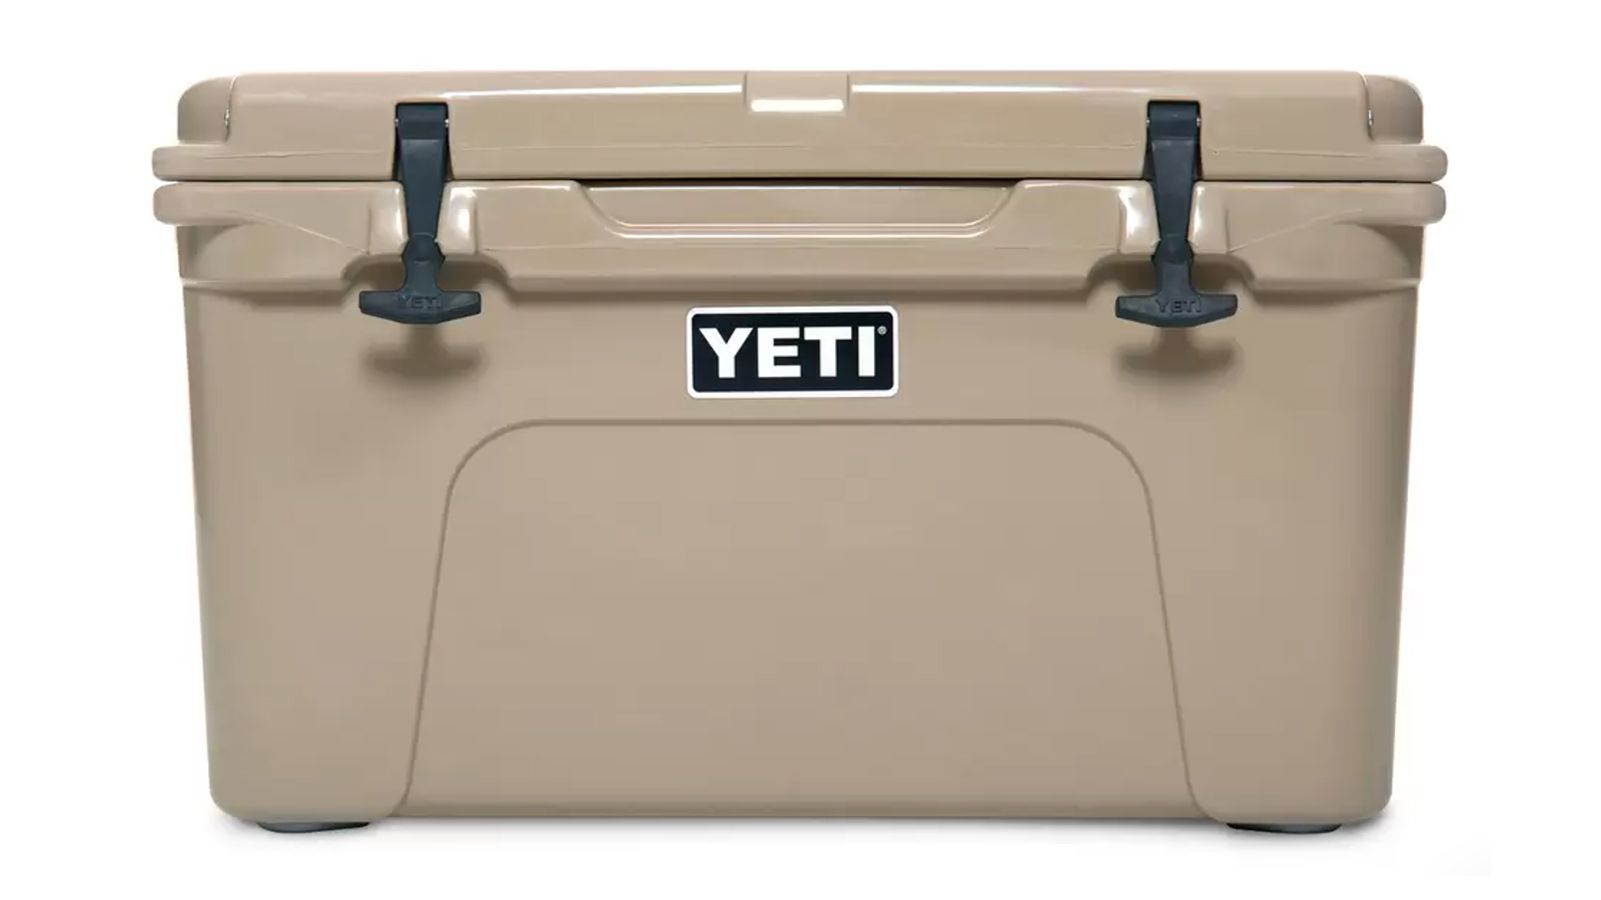 Prep for your next tailgate with Prime Day's 30% off YETI Cooler